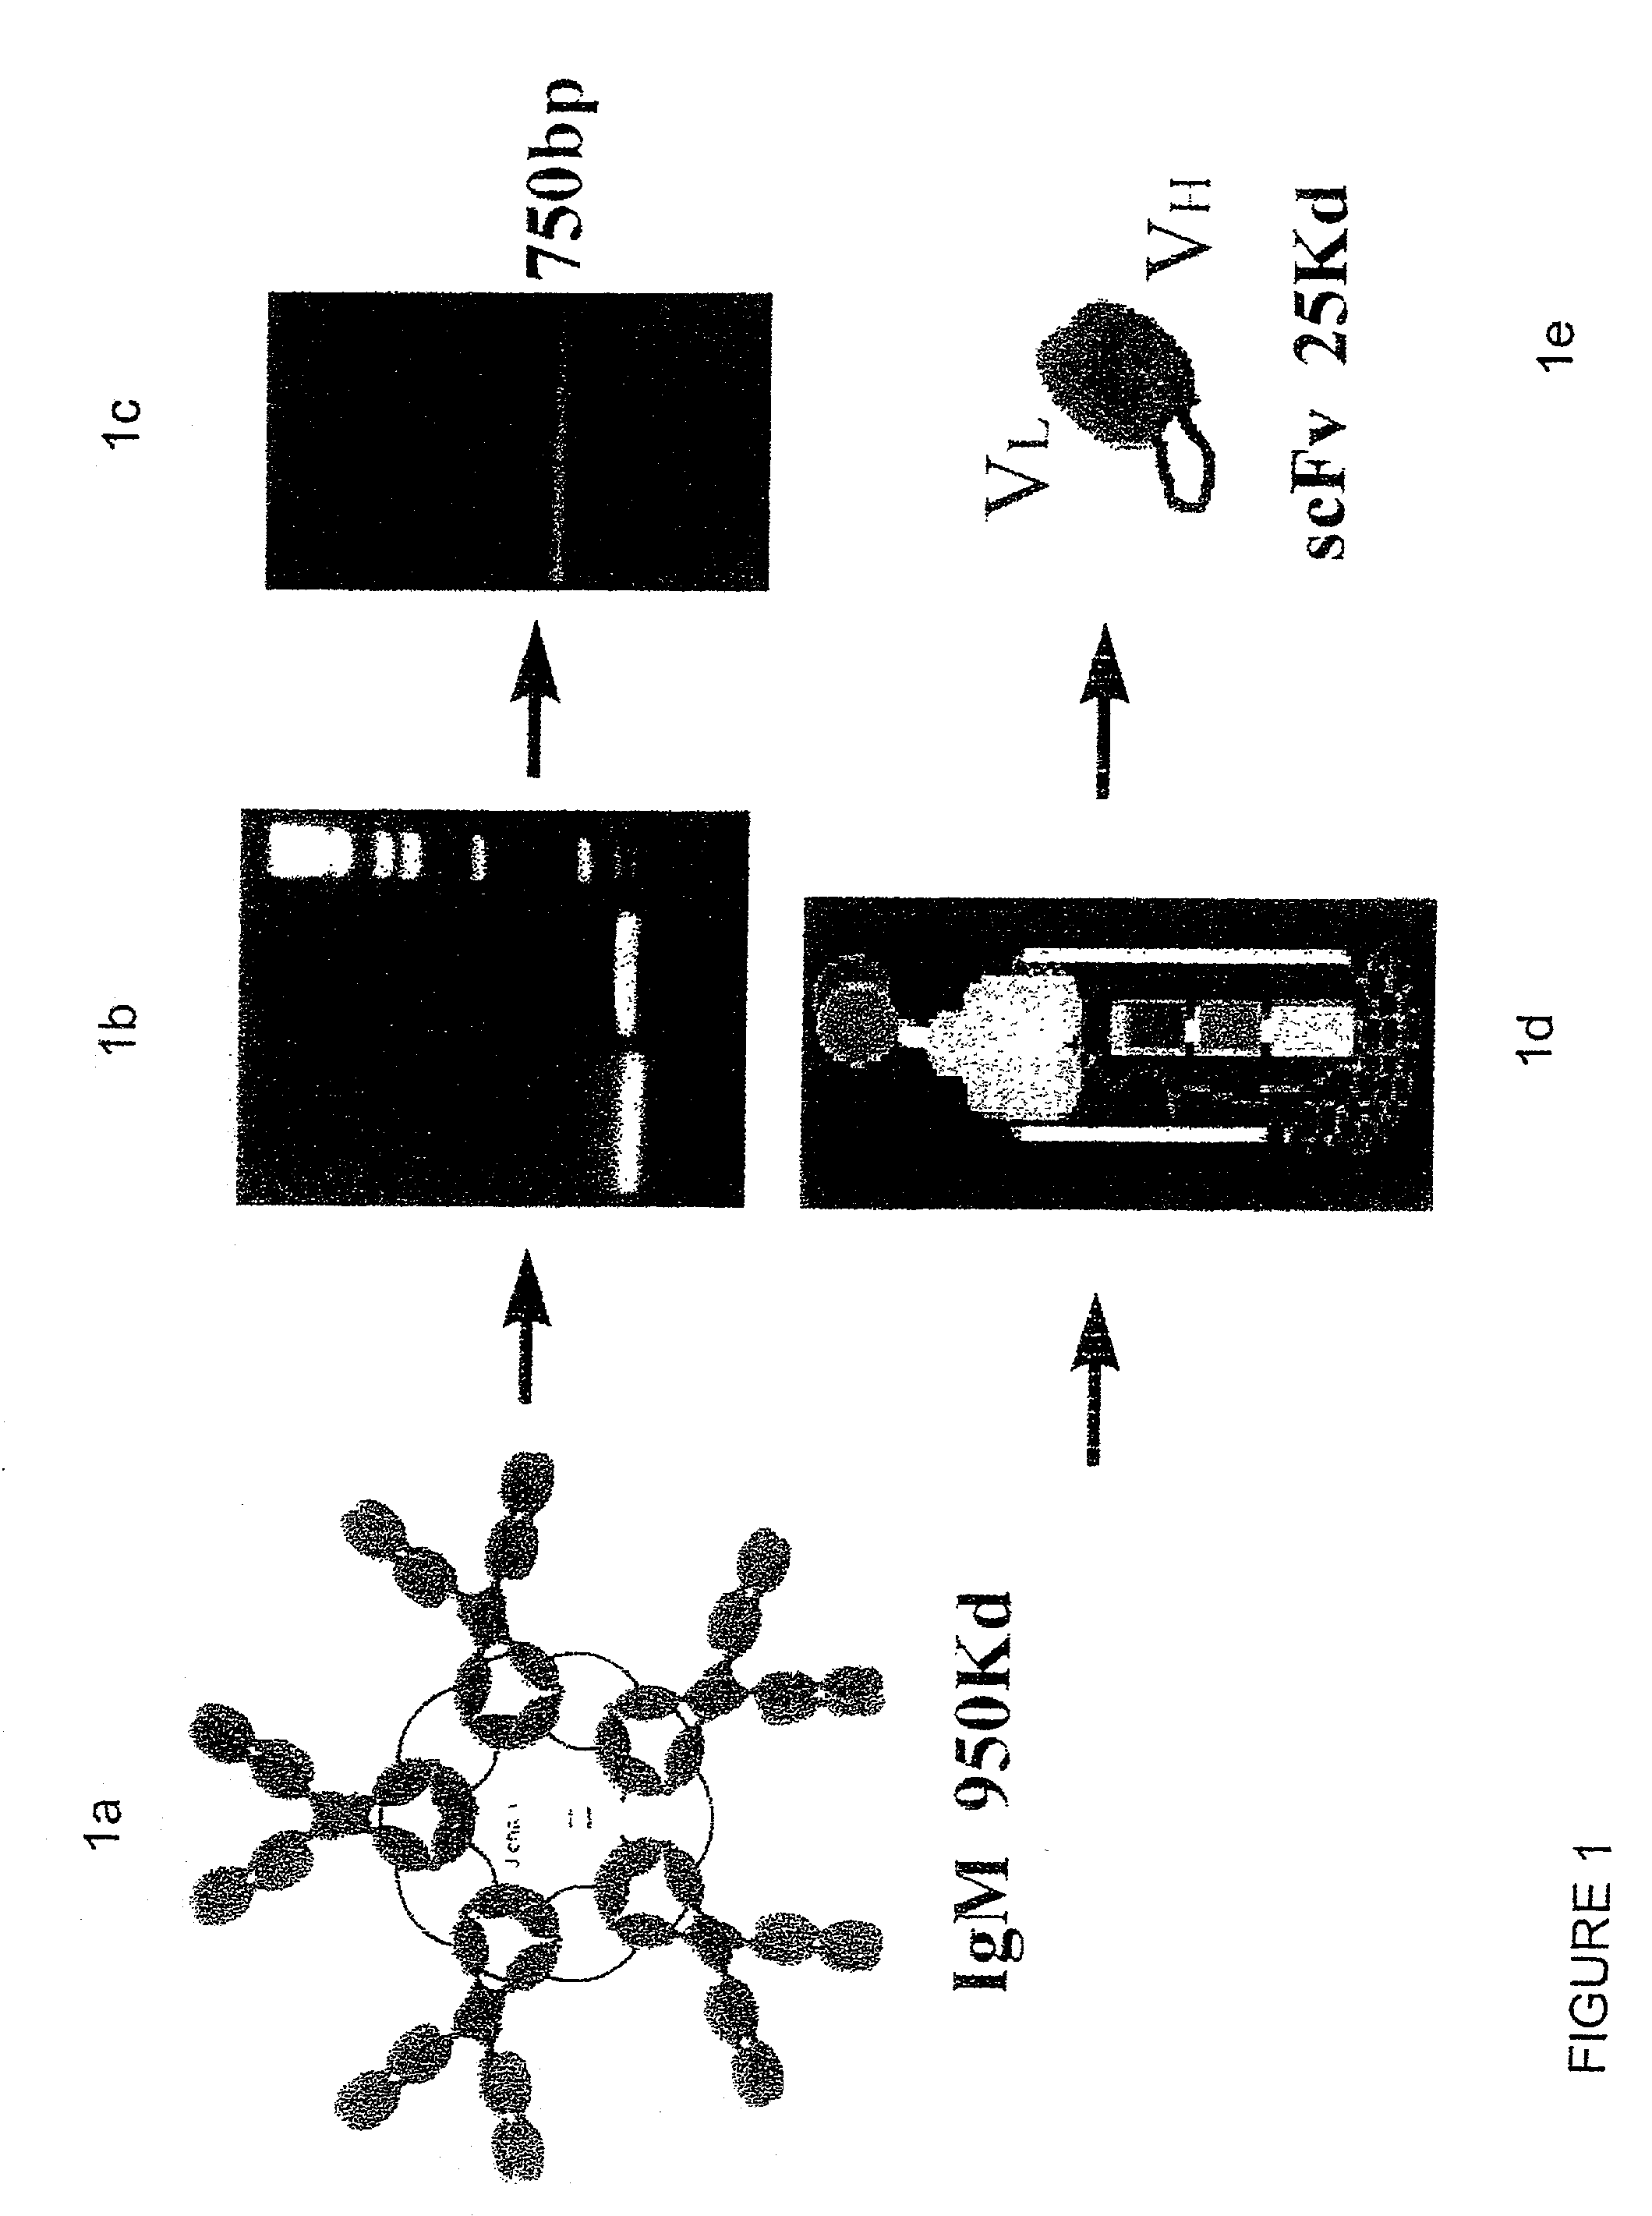 Agents and compositions and methods utilizing same useful in diagnosing and/or treating or preventing plaque forming